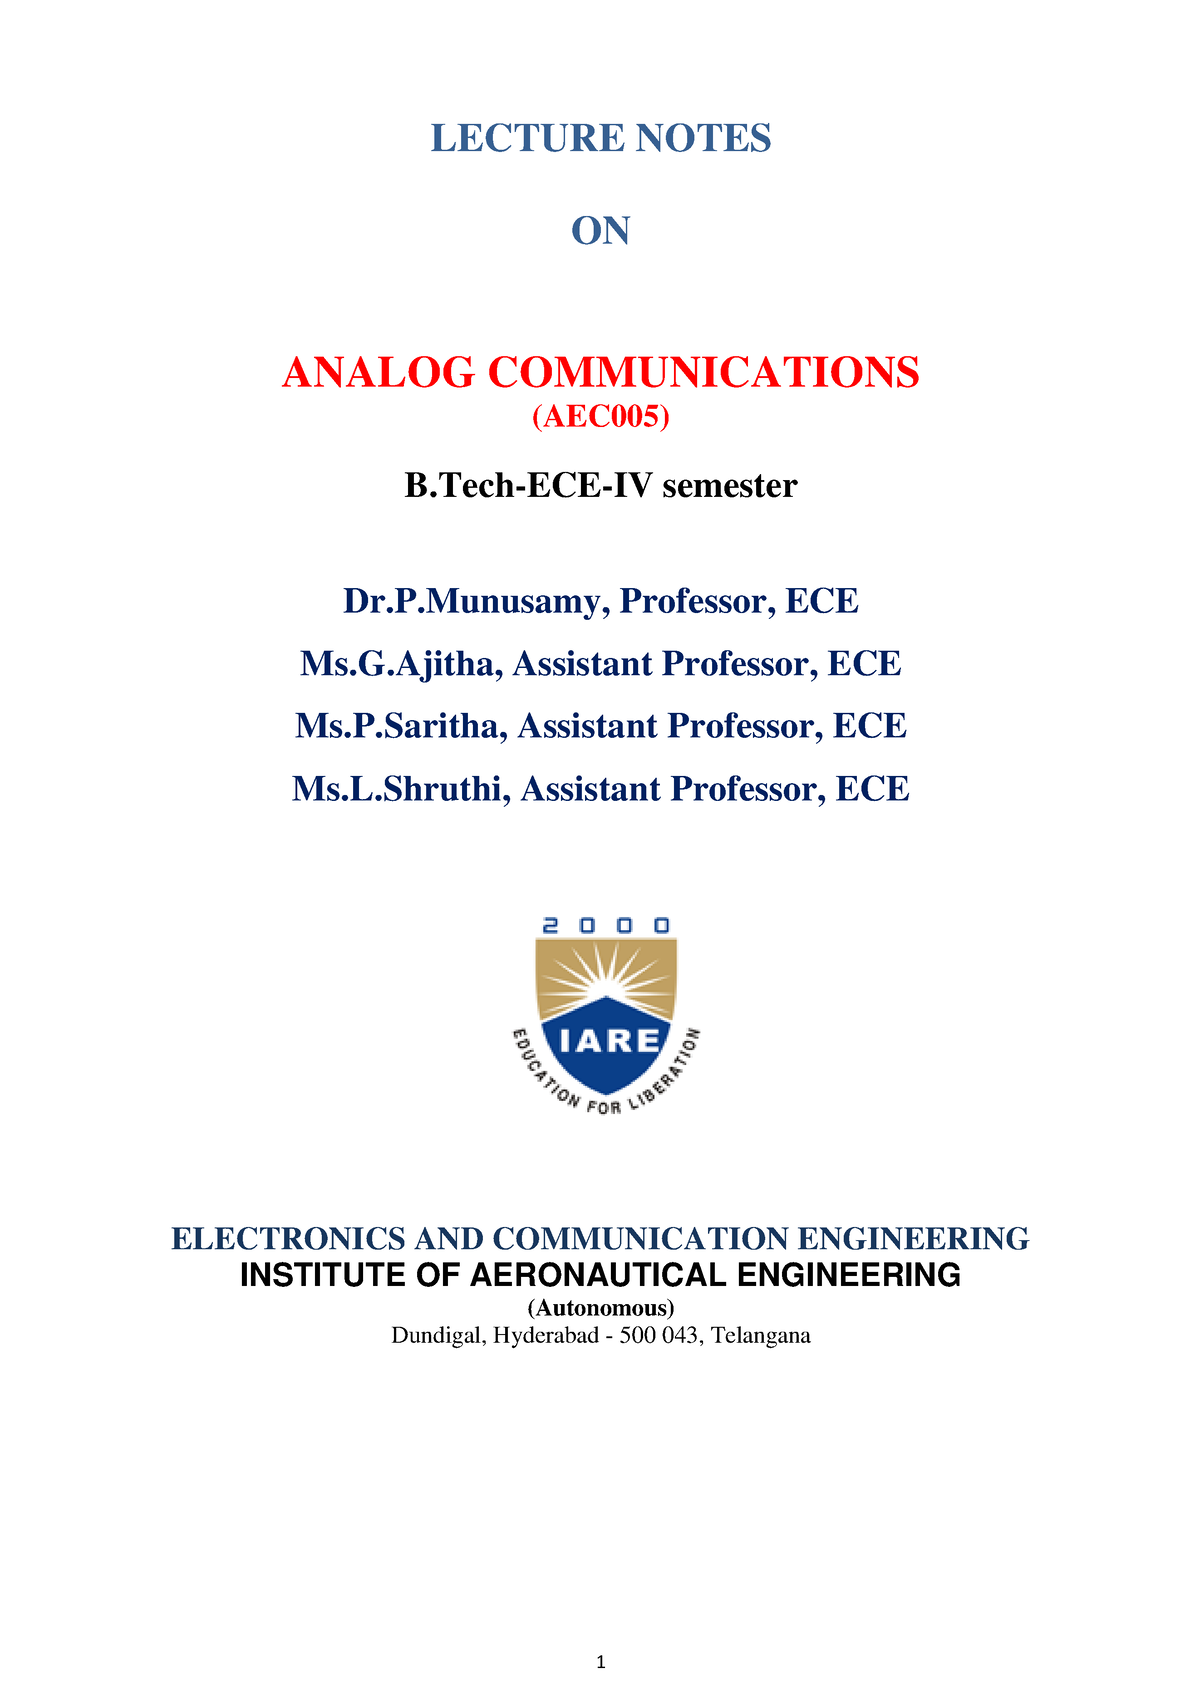 research paper on analog communication